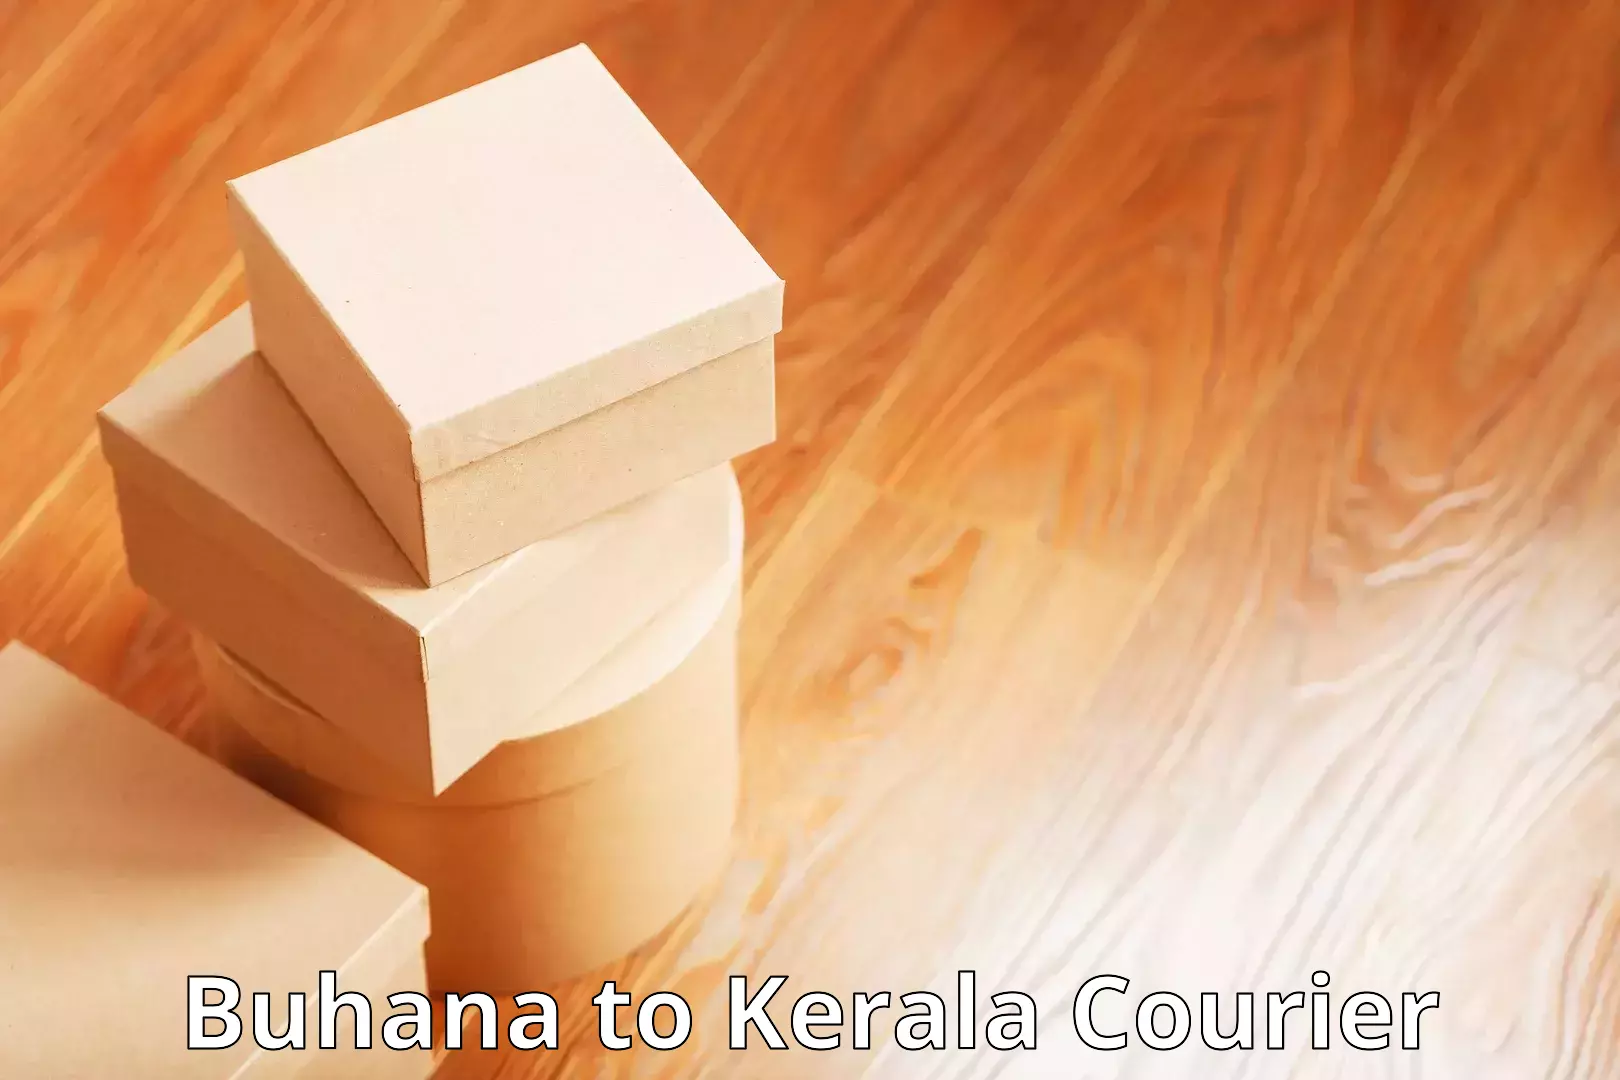 User-friendly delivery service Buhana to Kerala